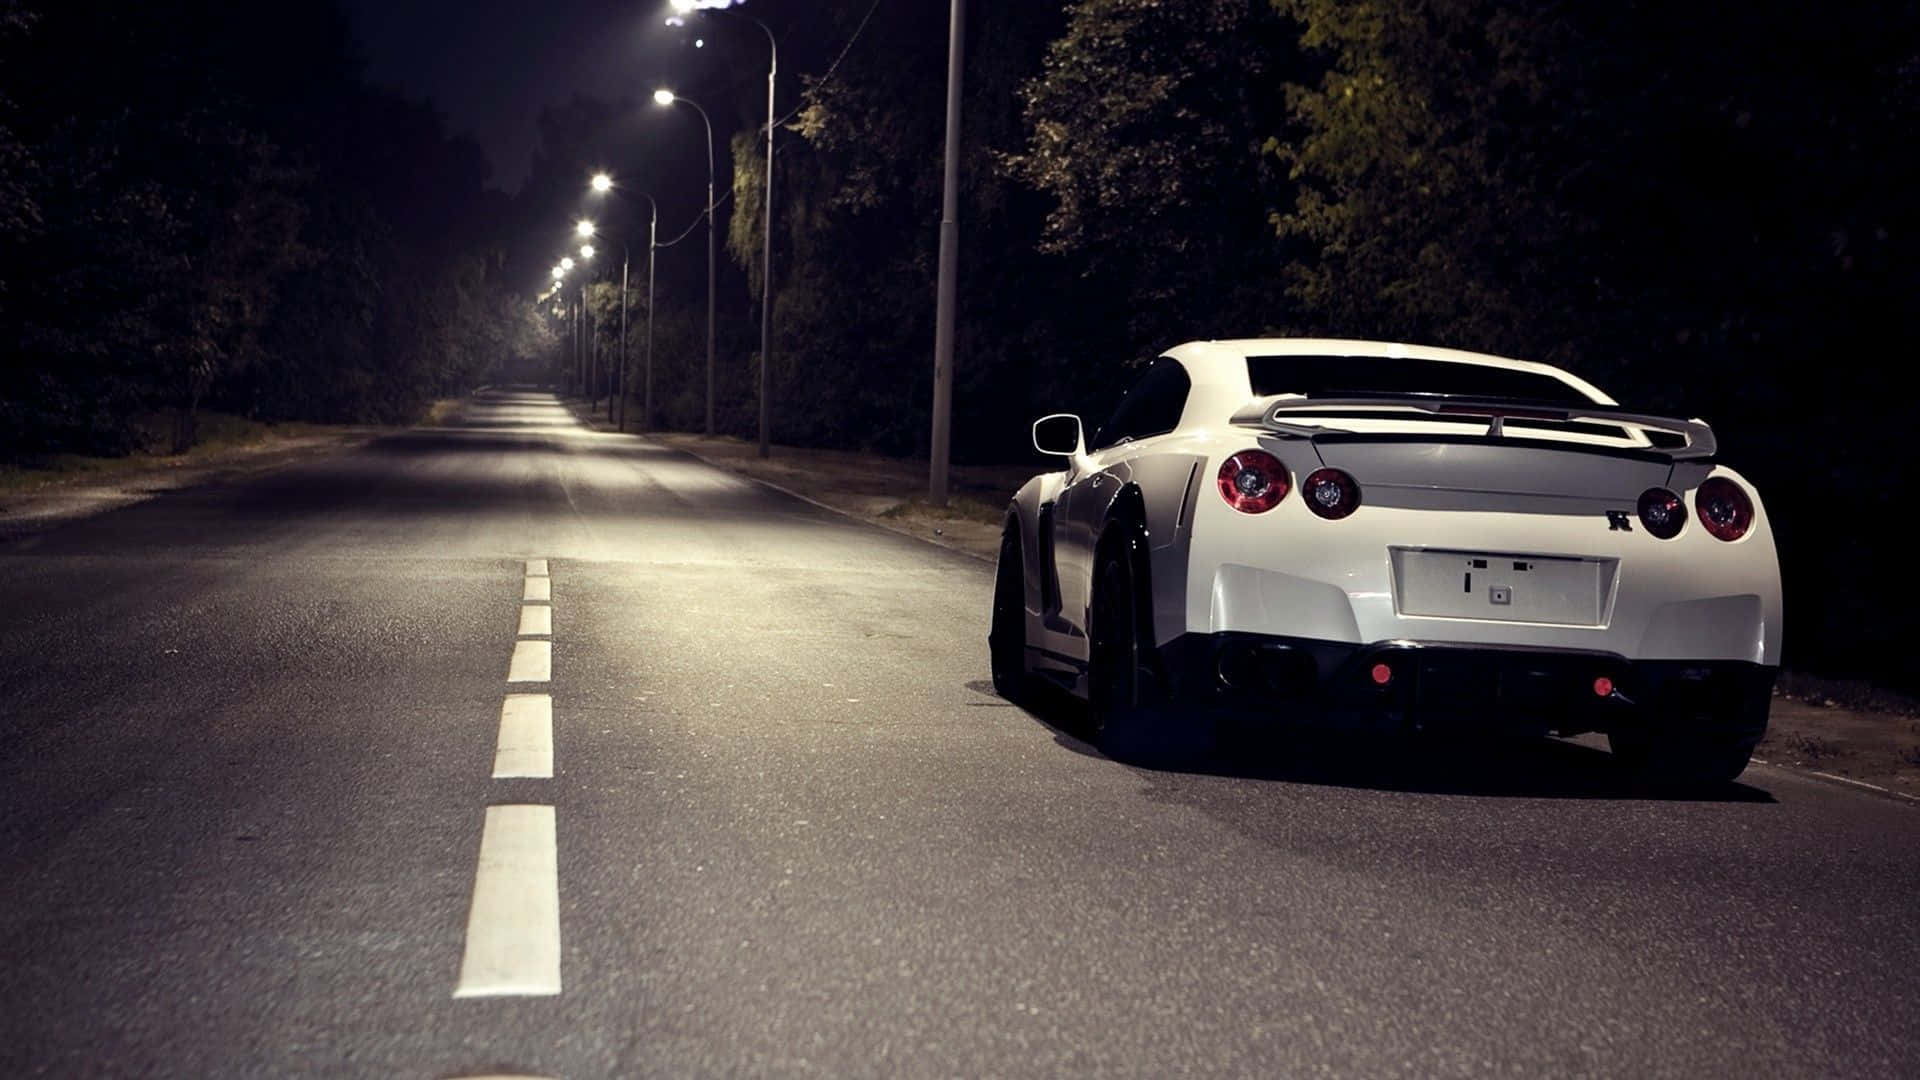 Show off your classic ride with the Nissan GTR R35 Wallpaper